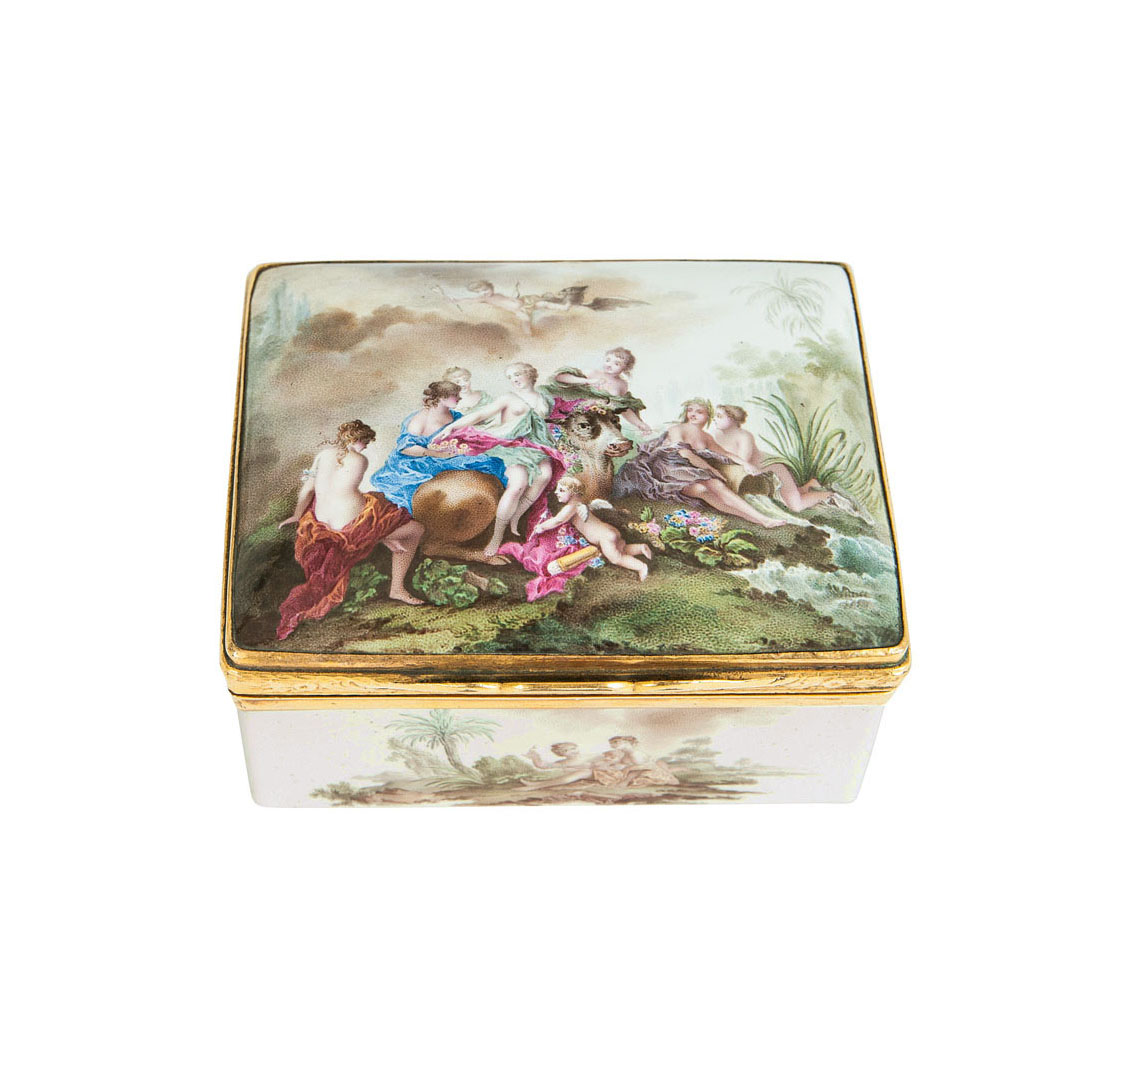 An exquisite enamel-tabatière with 'Europa riding the bull'